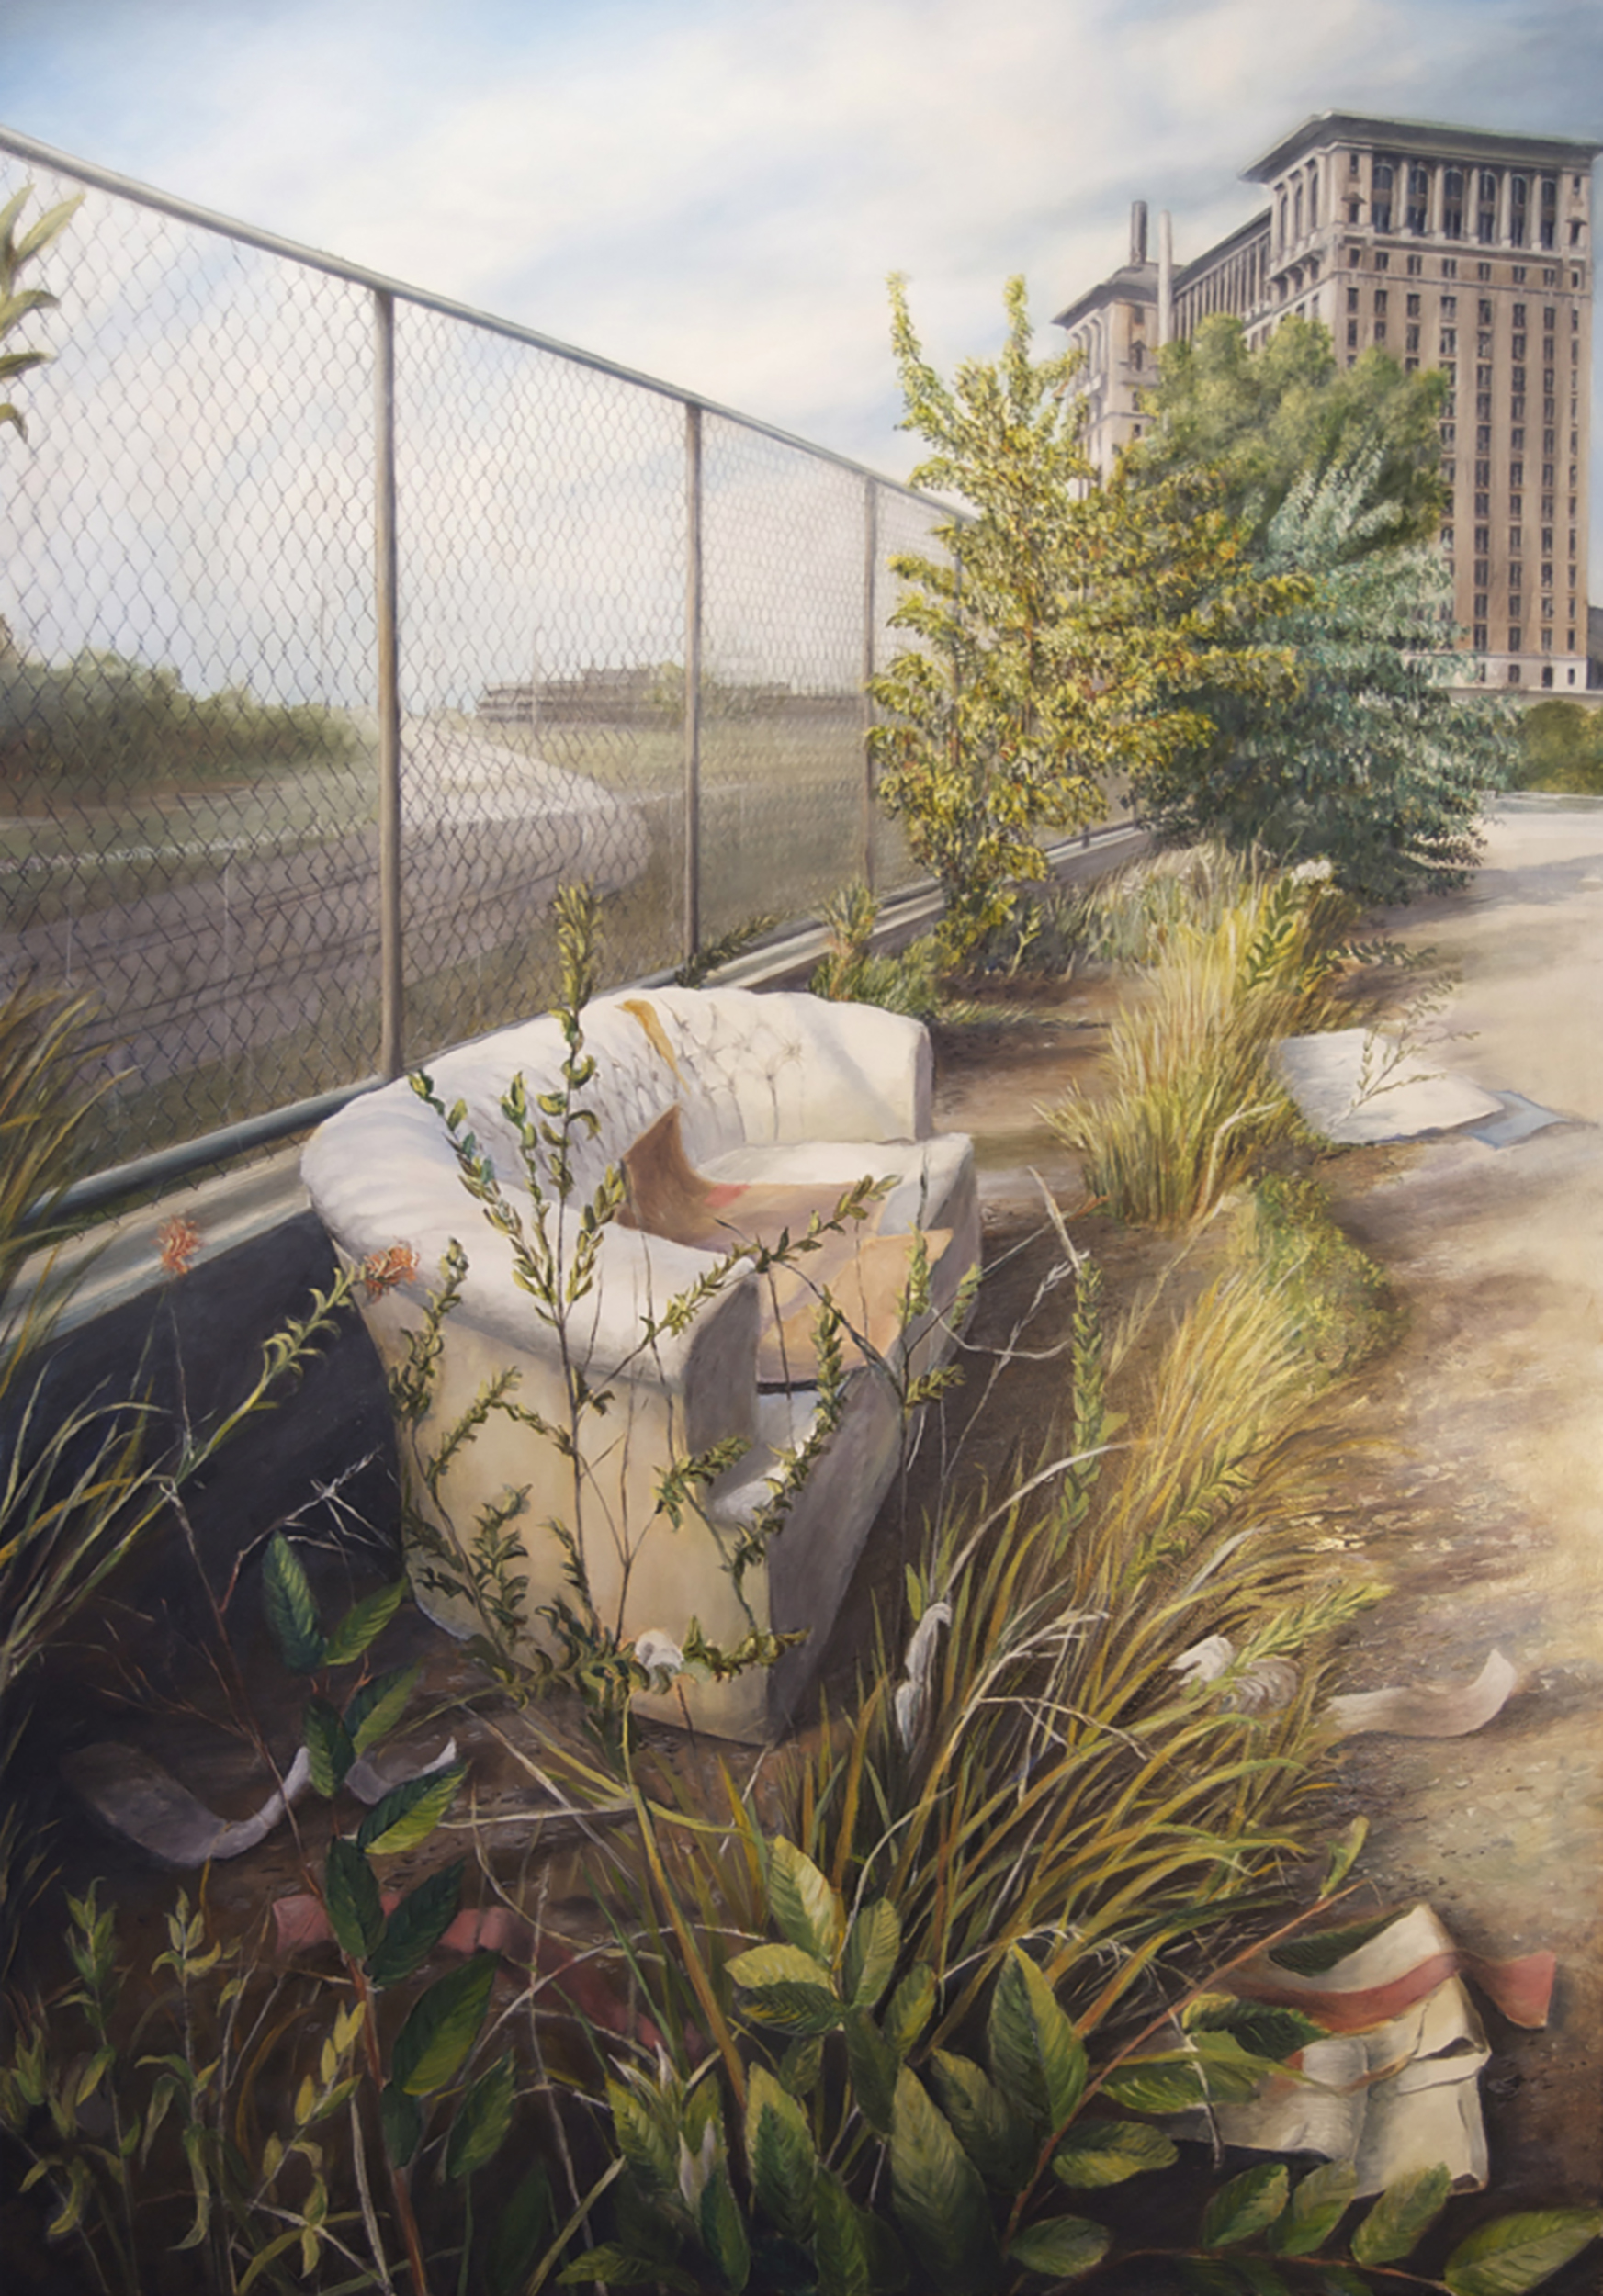   Couch and Garbage near    Michigan Terminal, Detroit   2011  Oil on canvas  42 x 28 inches    